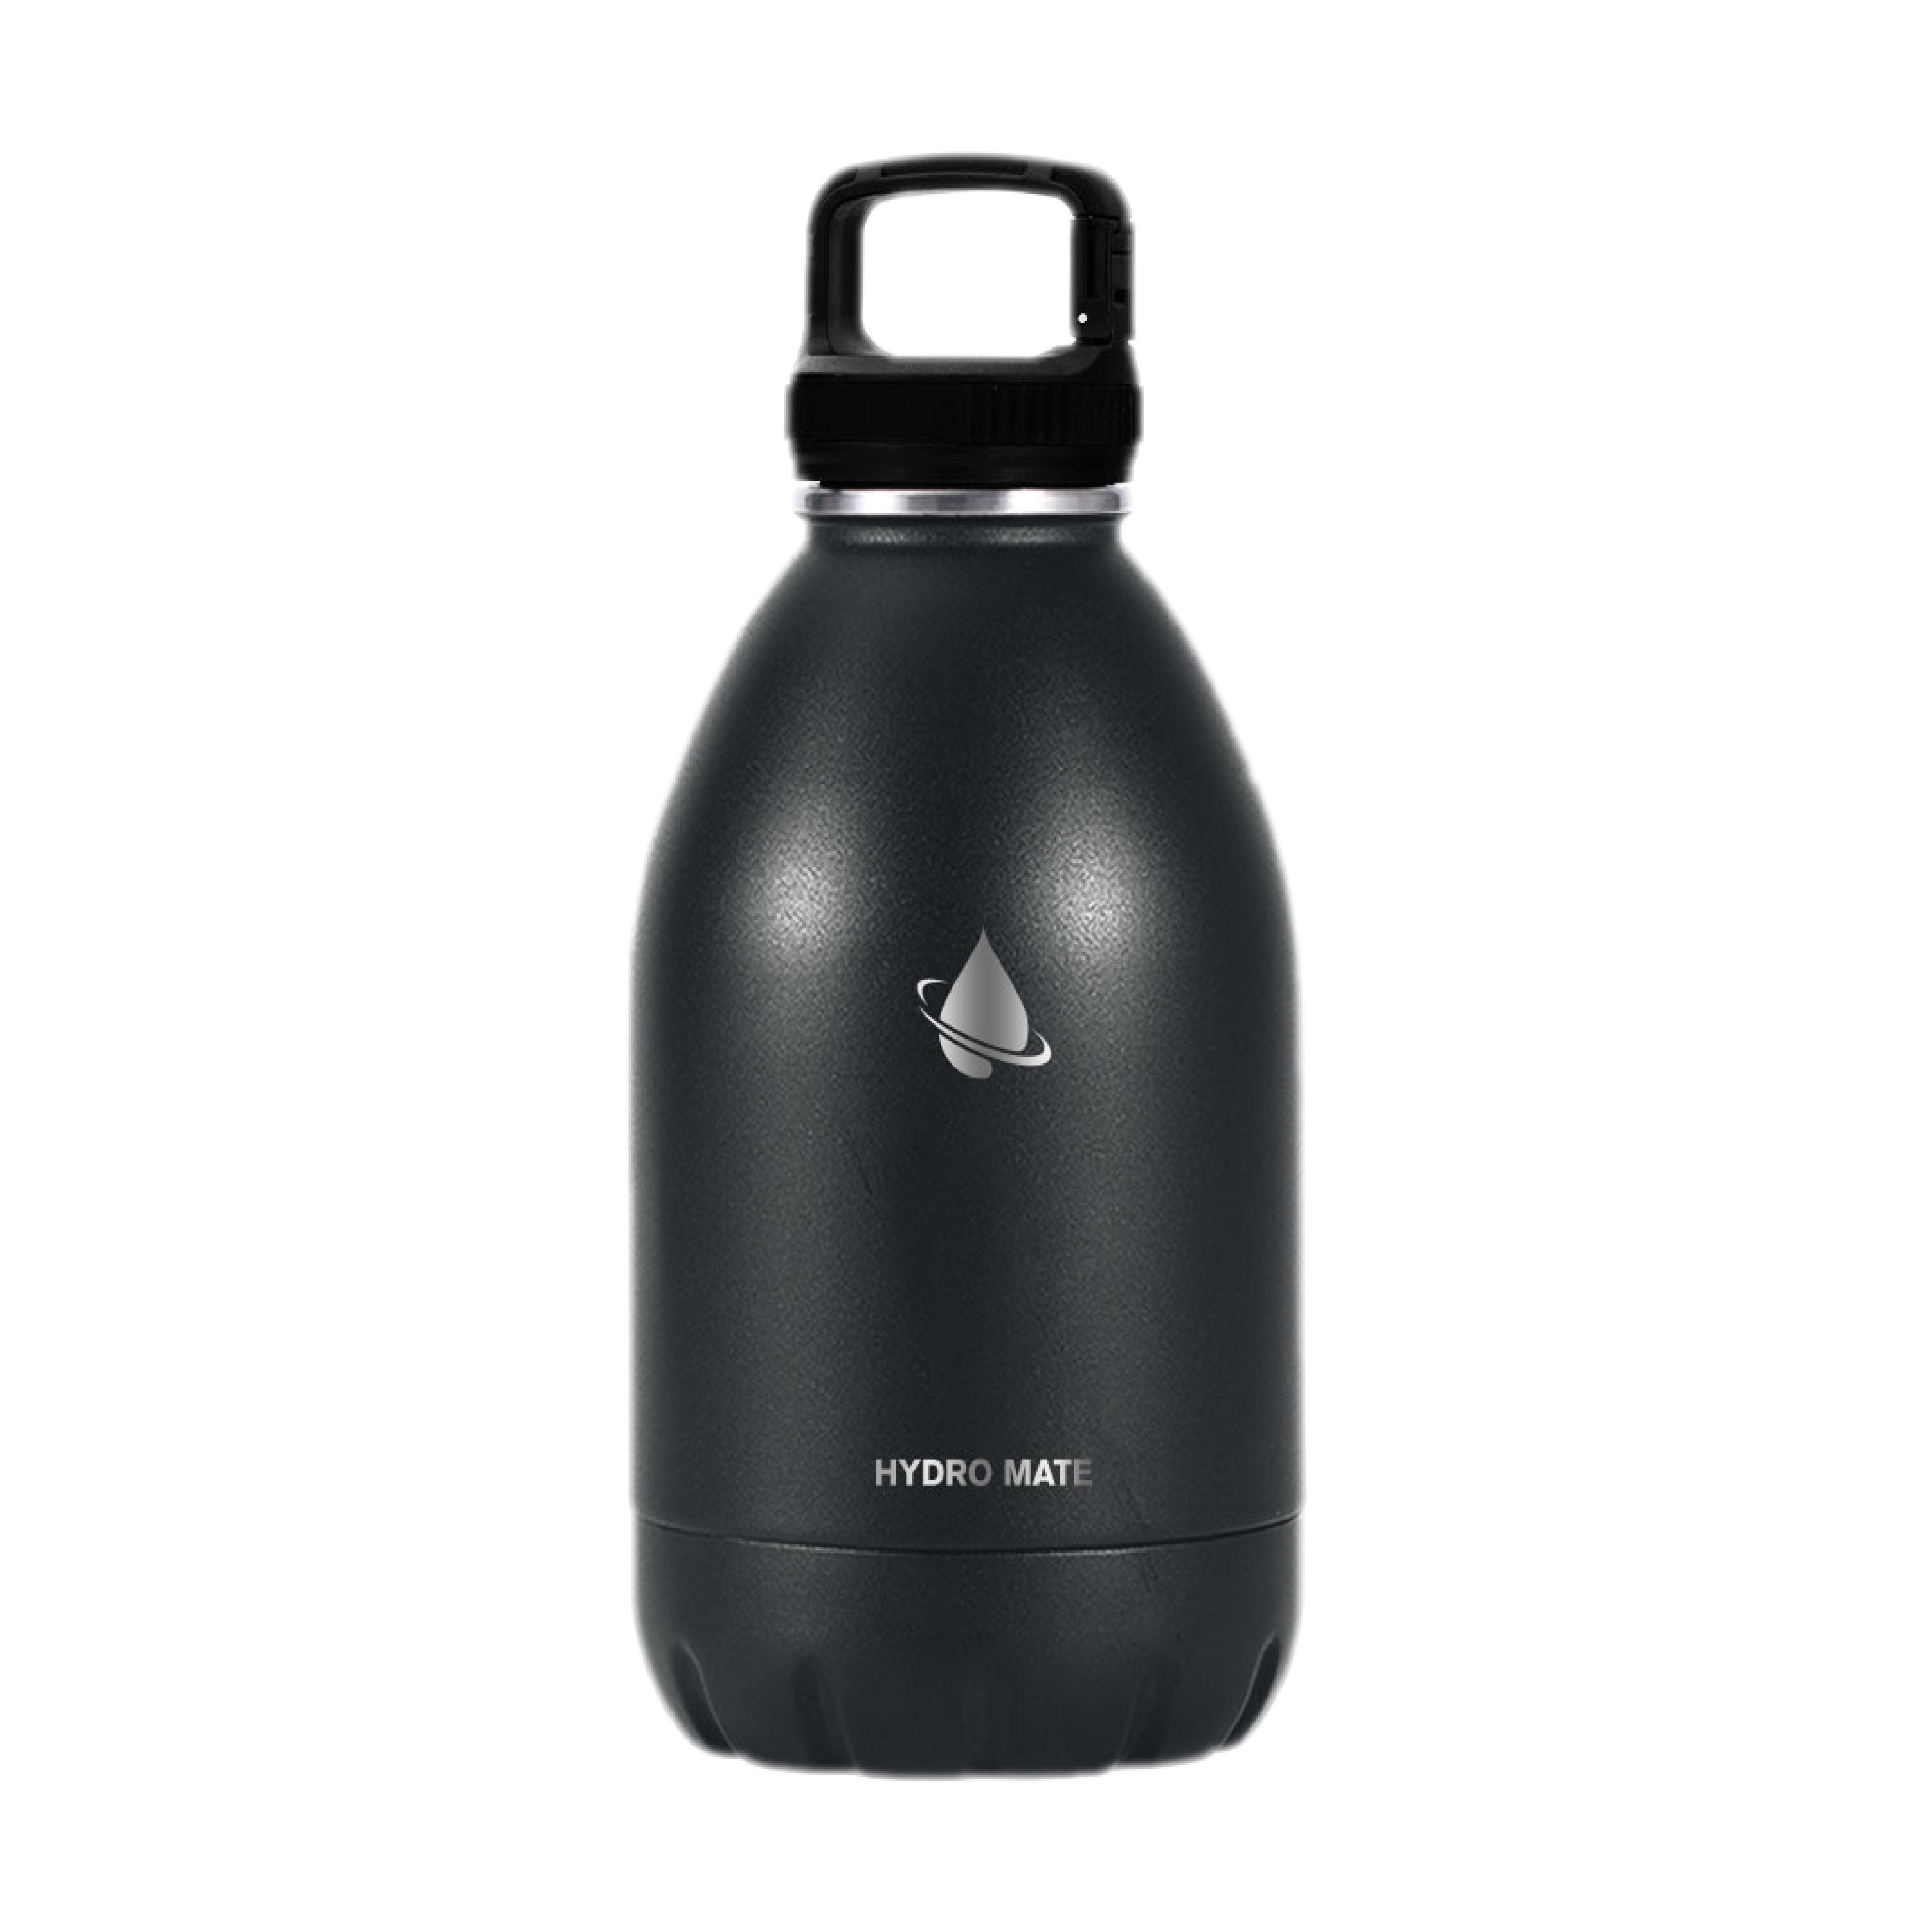 Hydro Mate Extra Large Insulated Stainless Steel Water Bottle Black | Stainless Steel Water Bottles | Brilliant Home Living